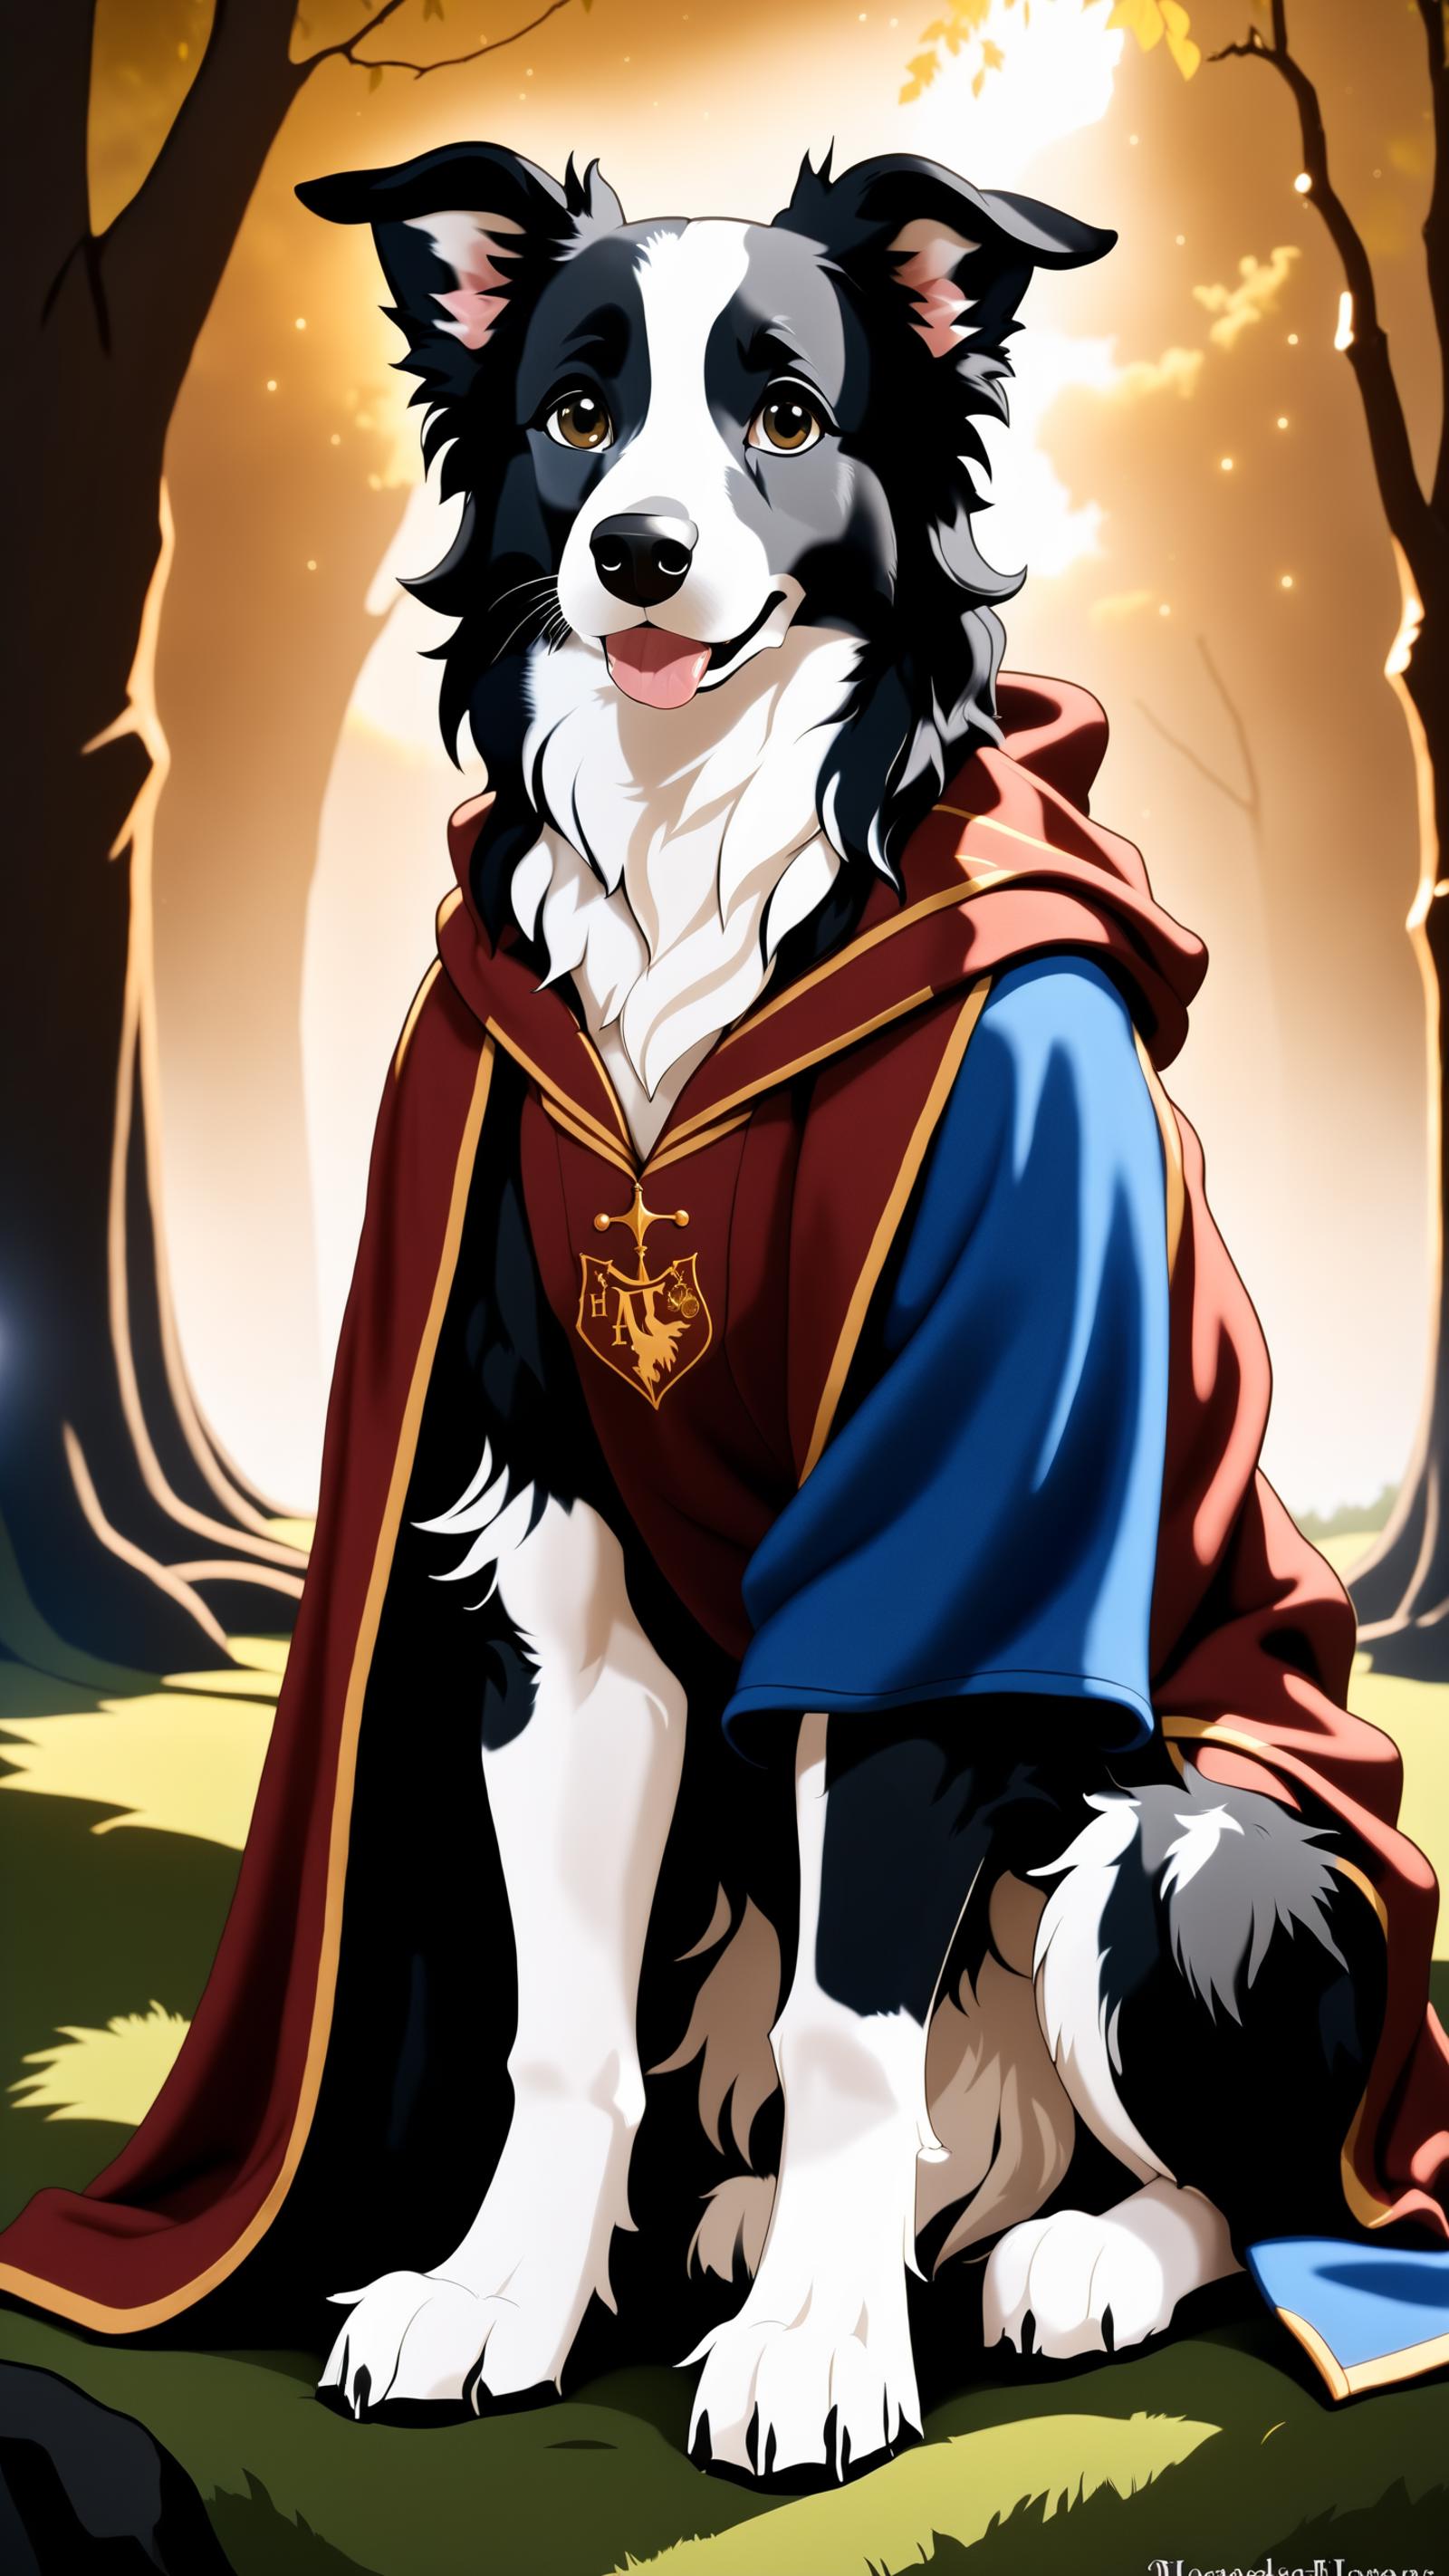 A black and white dog wearing a blue and red cape with a crest.